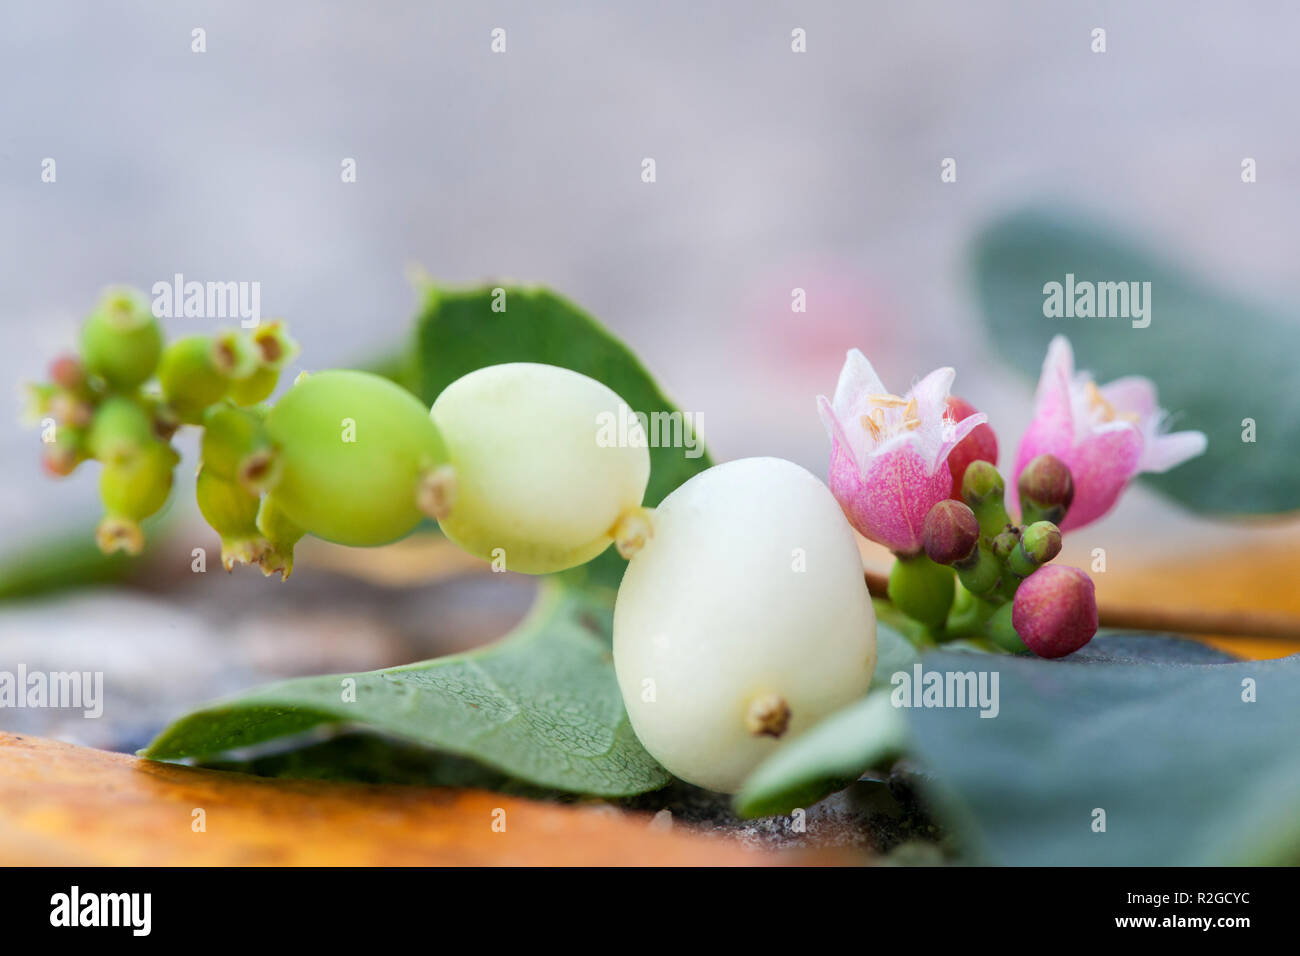 Branch of Snowberry with green leaves. Symphoricarpos, Albus. Shallow depth of field Stock Photo